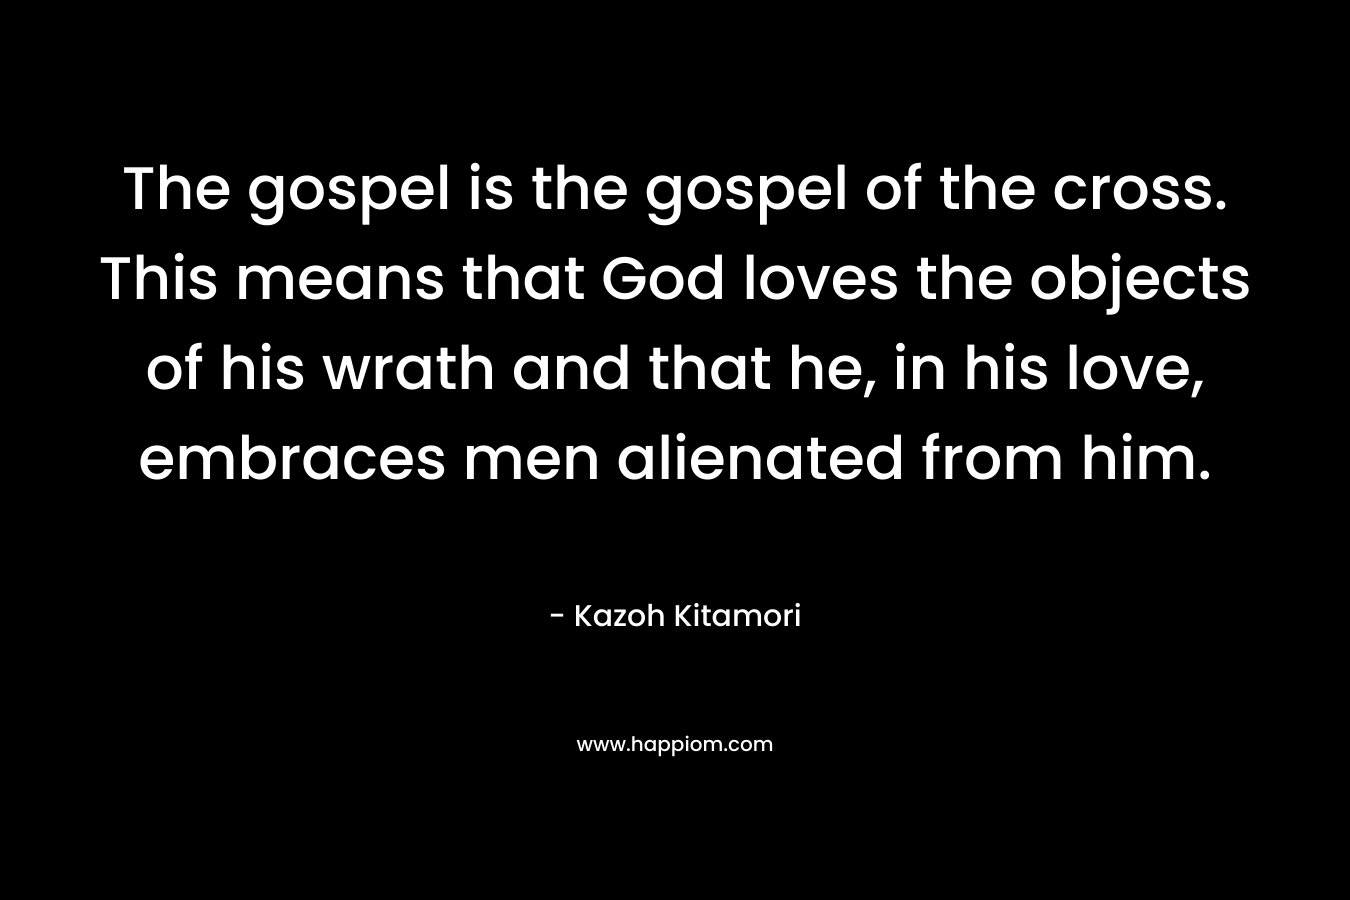 The gospel is the gospel of the cross. This means that God loves the objects of his wrath and that he, in his love, embraces men alienated from him. – Kazoh Kitamori